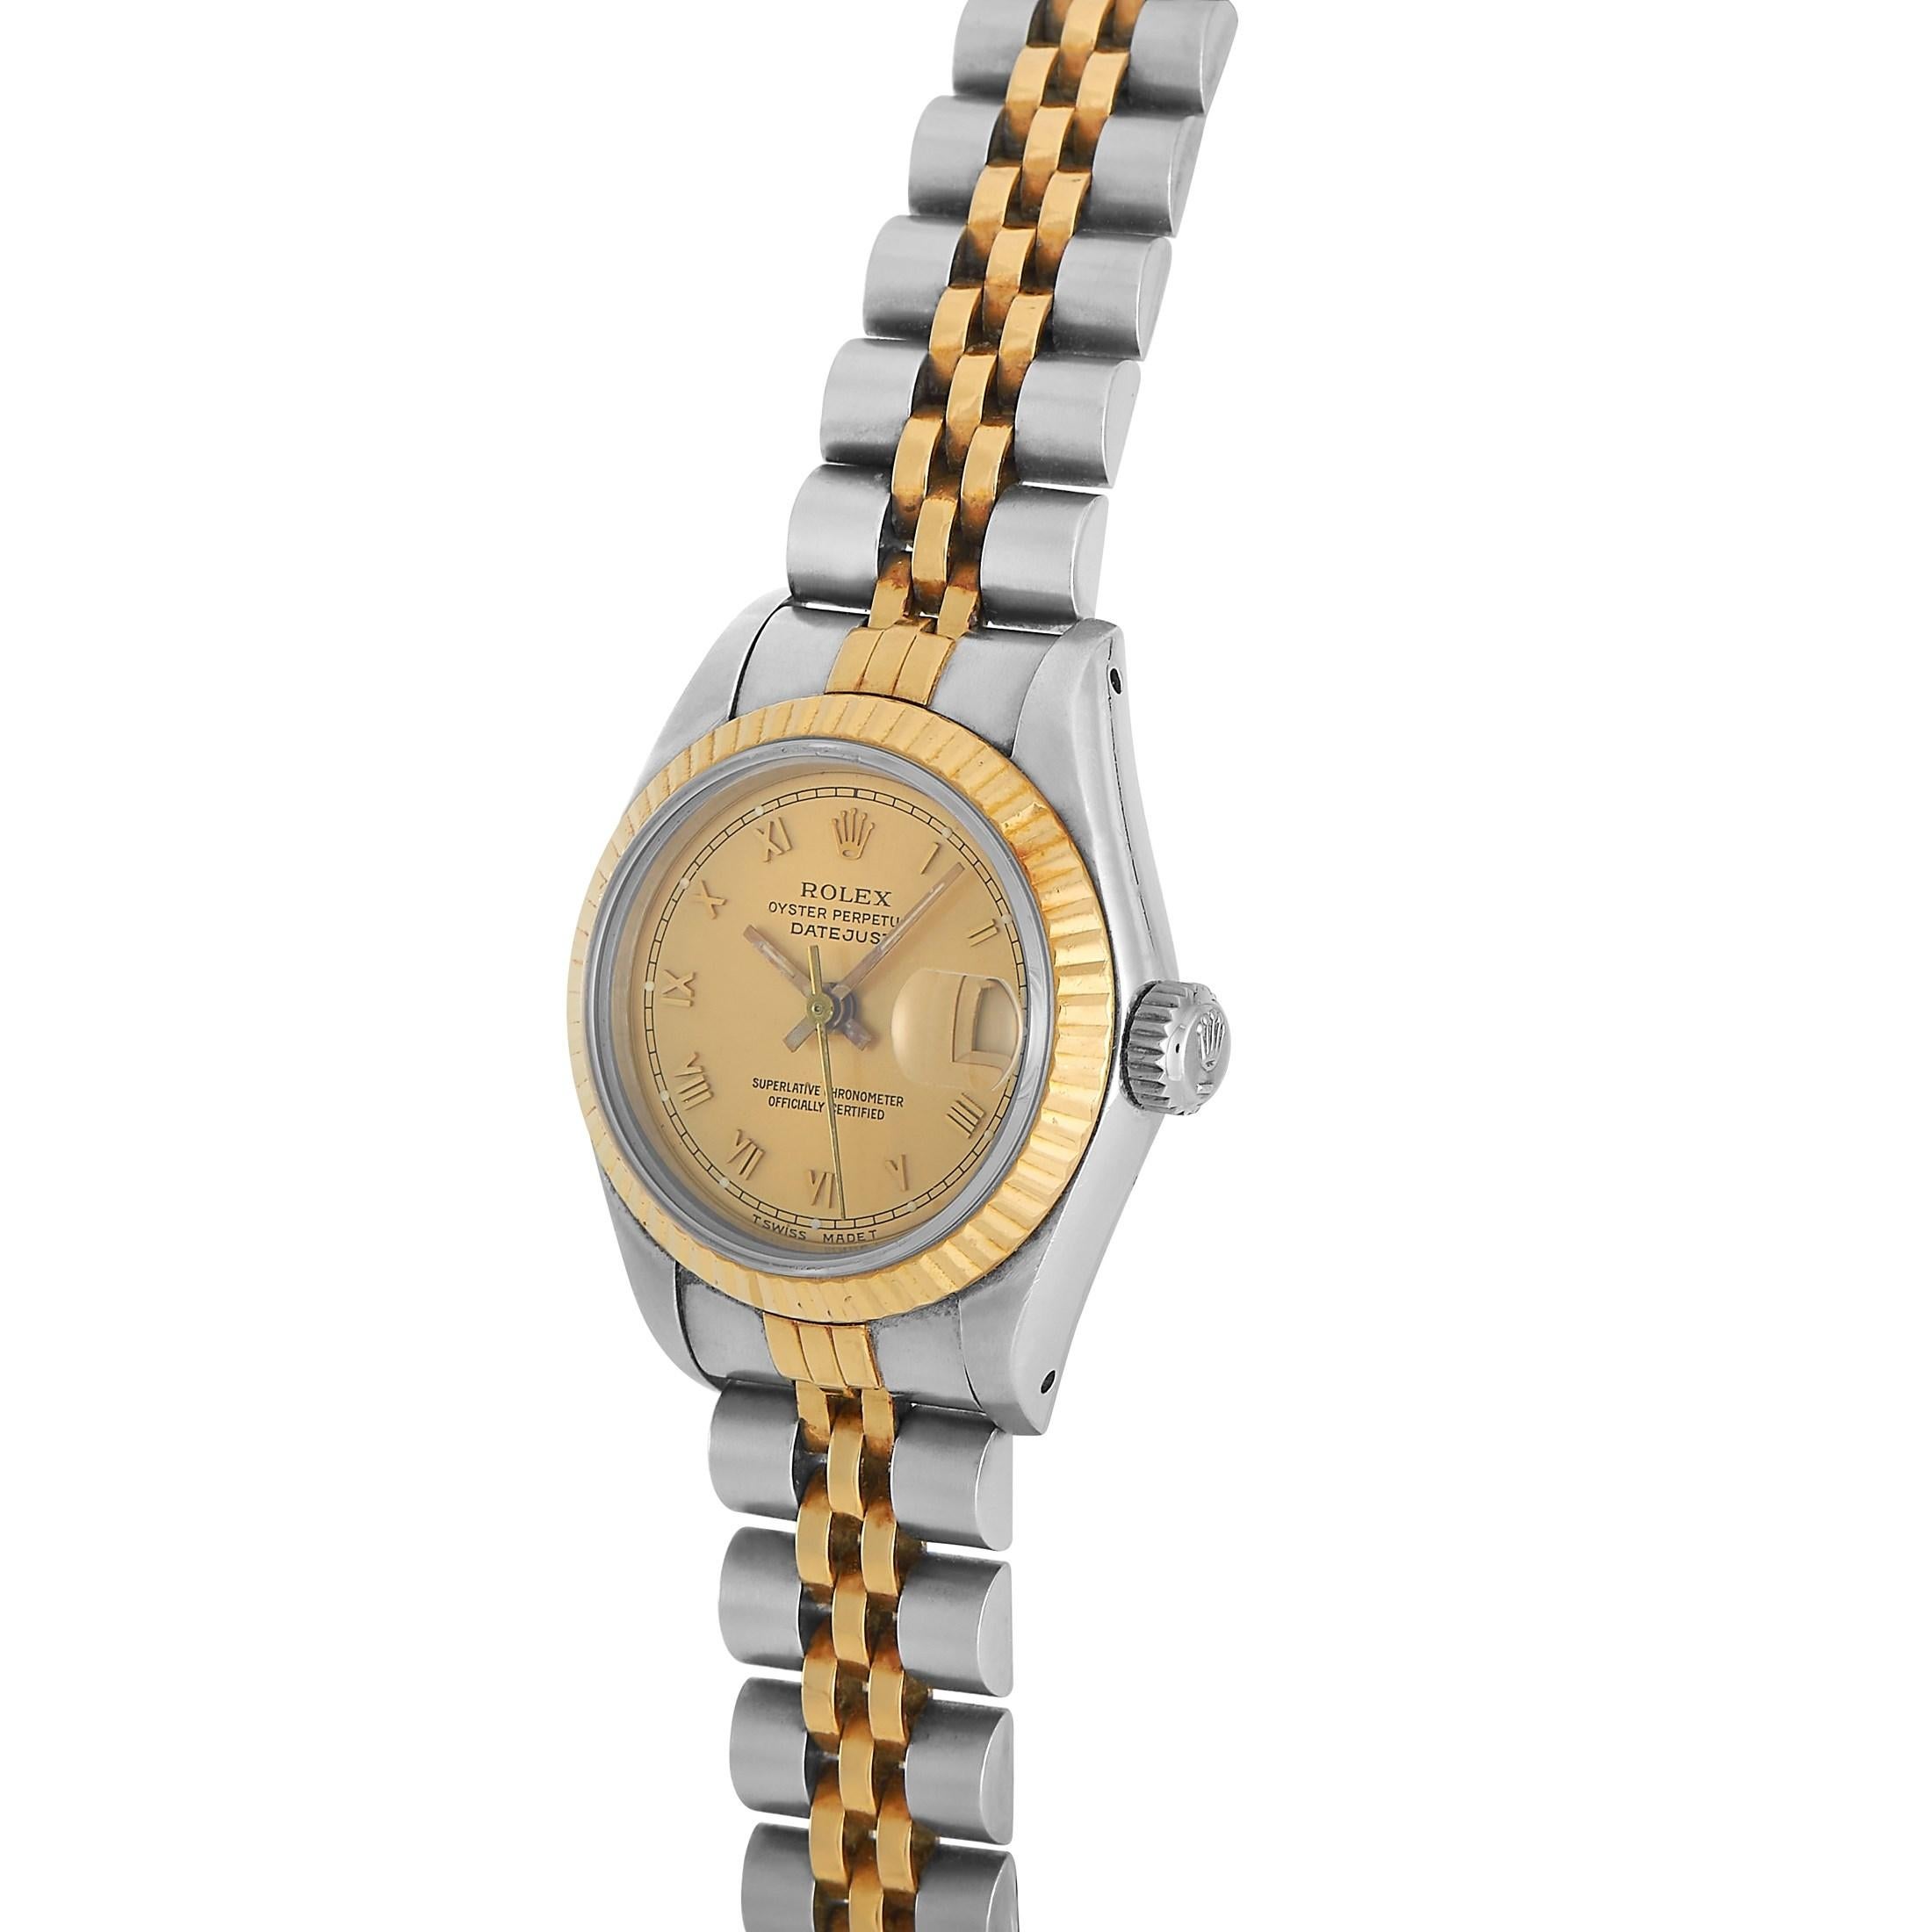 The Rolex Datejust Ladies Watch, reference number 691733B, is an everyday piece that allows you to add luxury to any outfit.

Perfectly poised, this timepiece includes a 26mm stainless steel case and an 18K Yellow Gold bezel. This chic pairing of